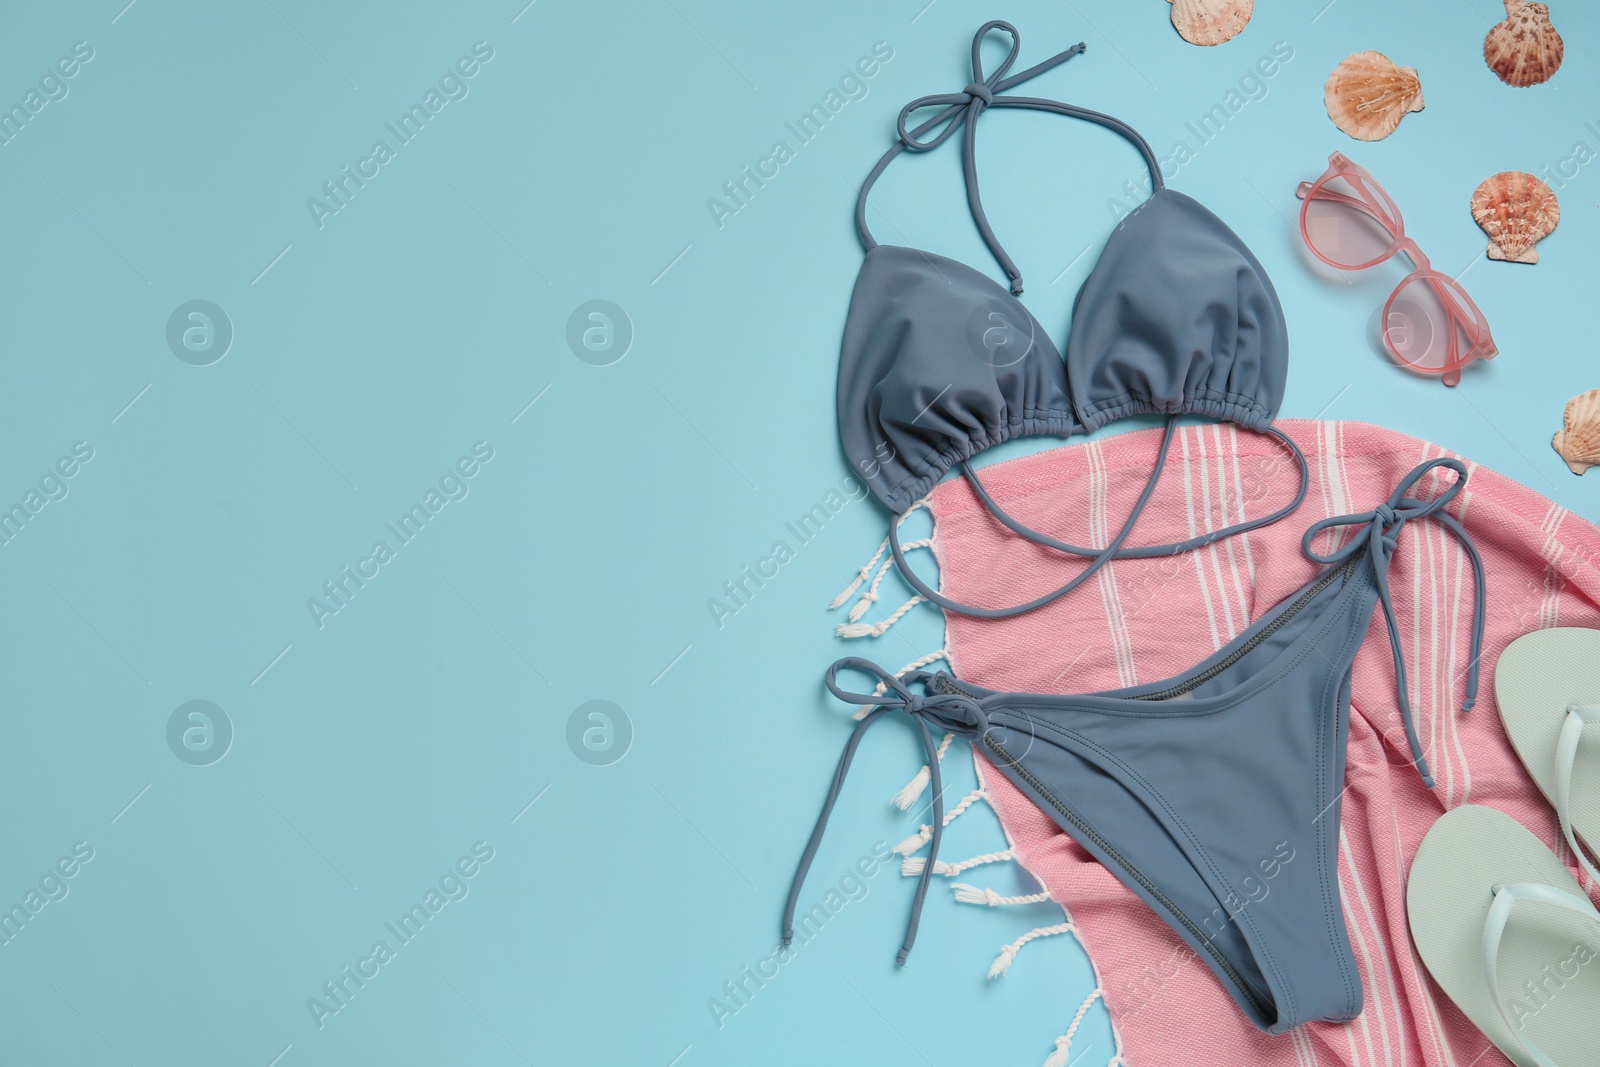 Photo of Stylish bikini and beach accessories on light blue background, flat lay. Space for text